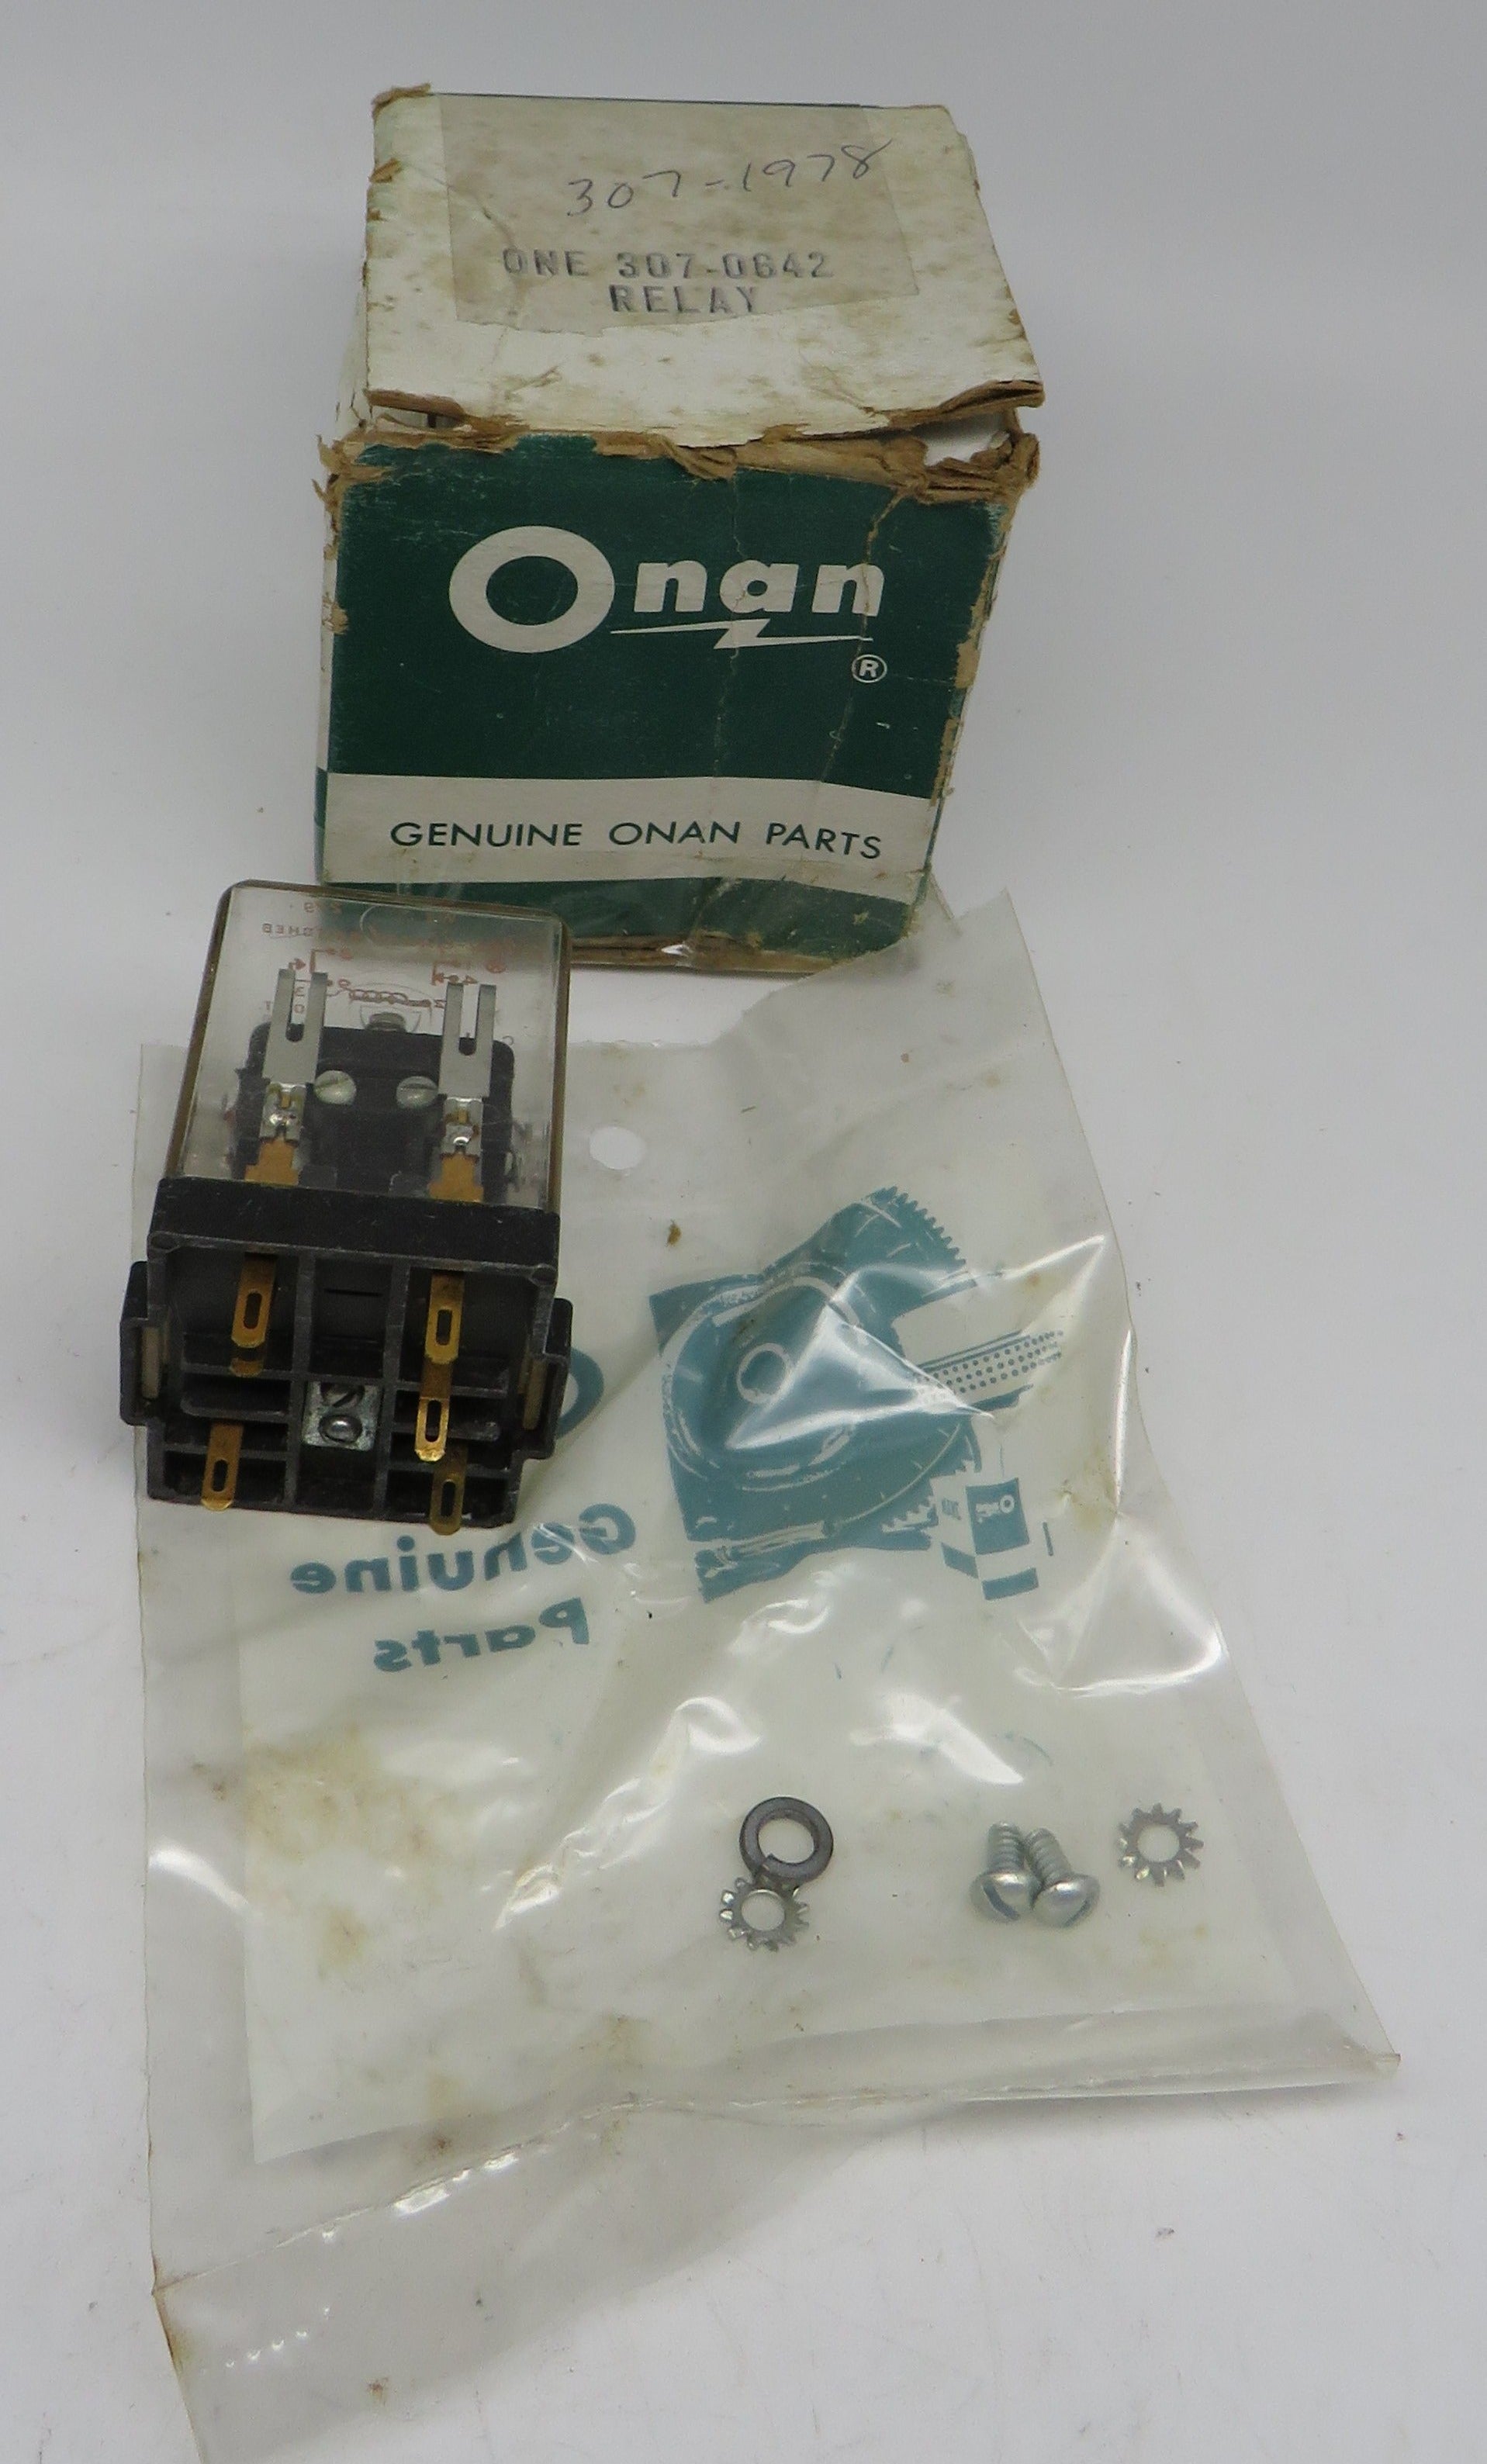 307-0642 Onan Relay Kit (Replaced by new# 307-1978) Both OBSOLETE 